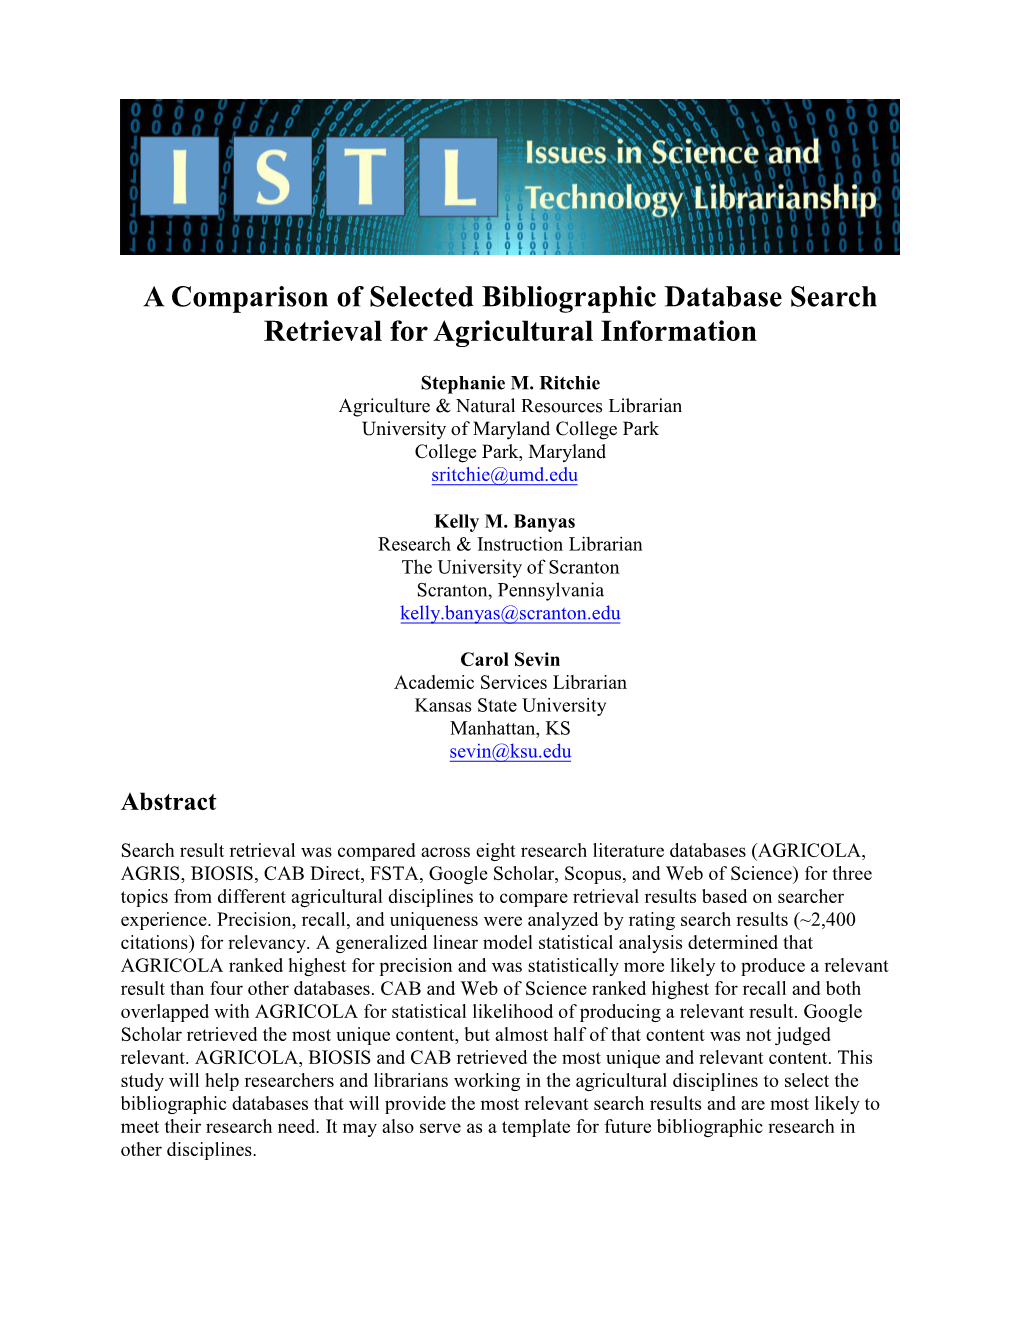 A Comparison of Selected Bibliographic Database Search Retrieval for Agricultural Information